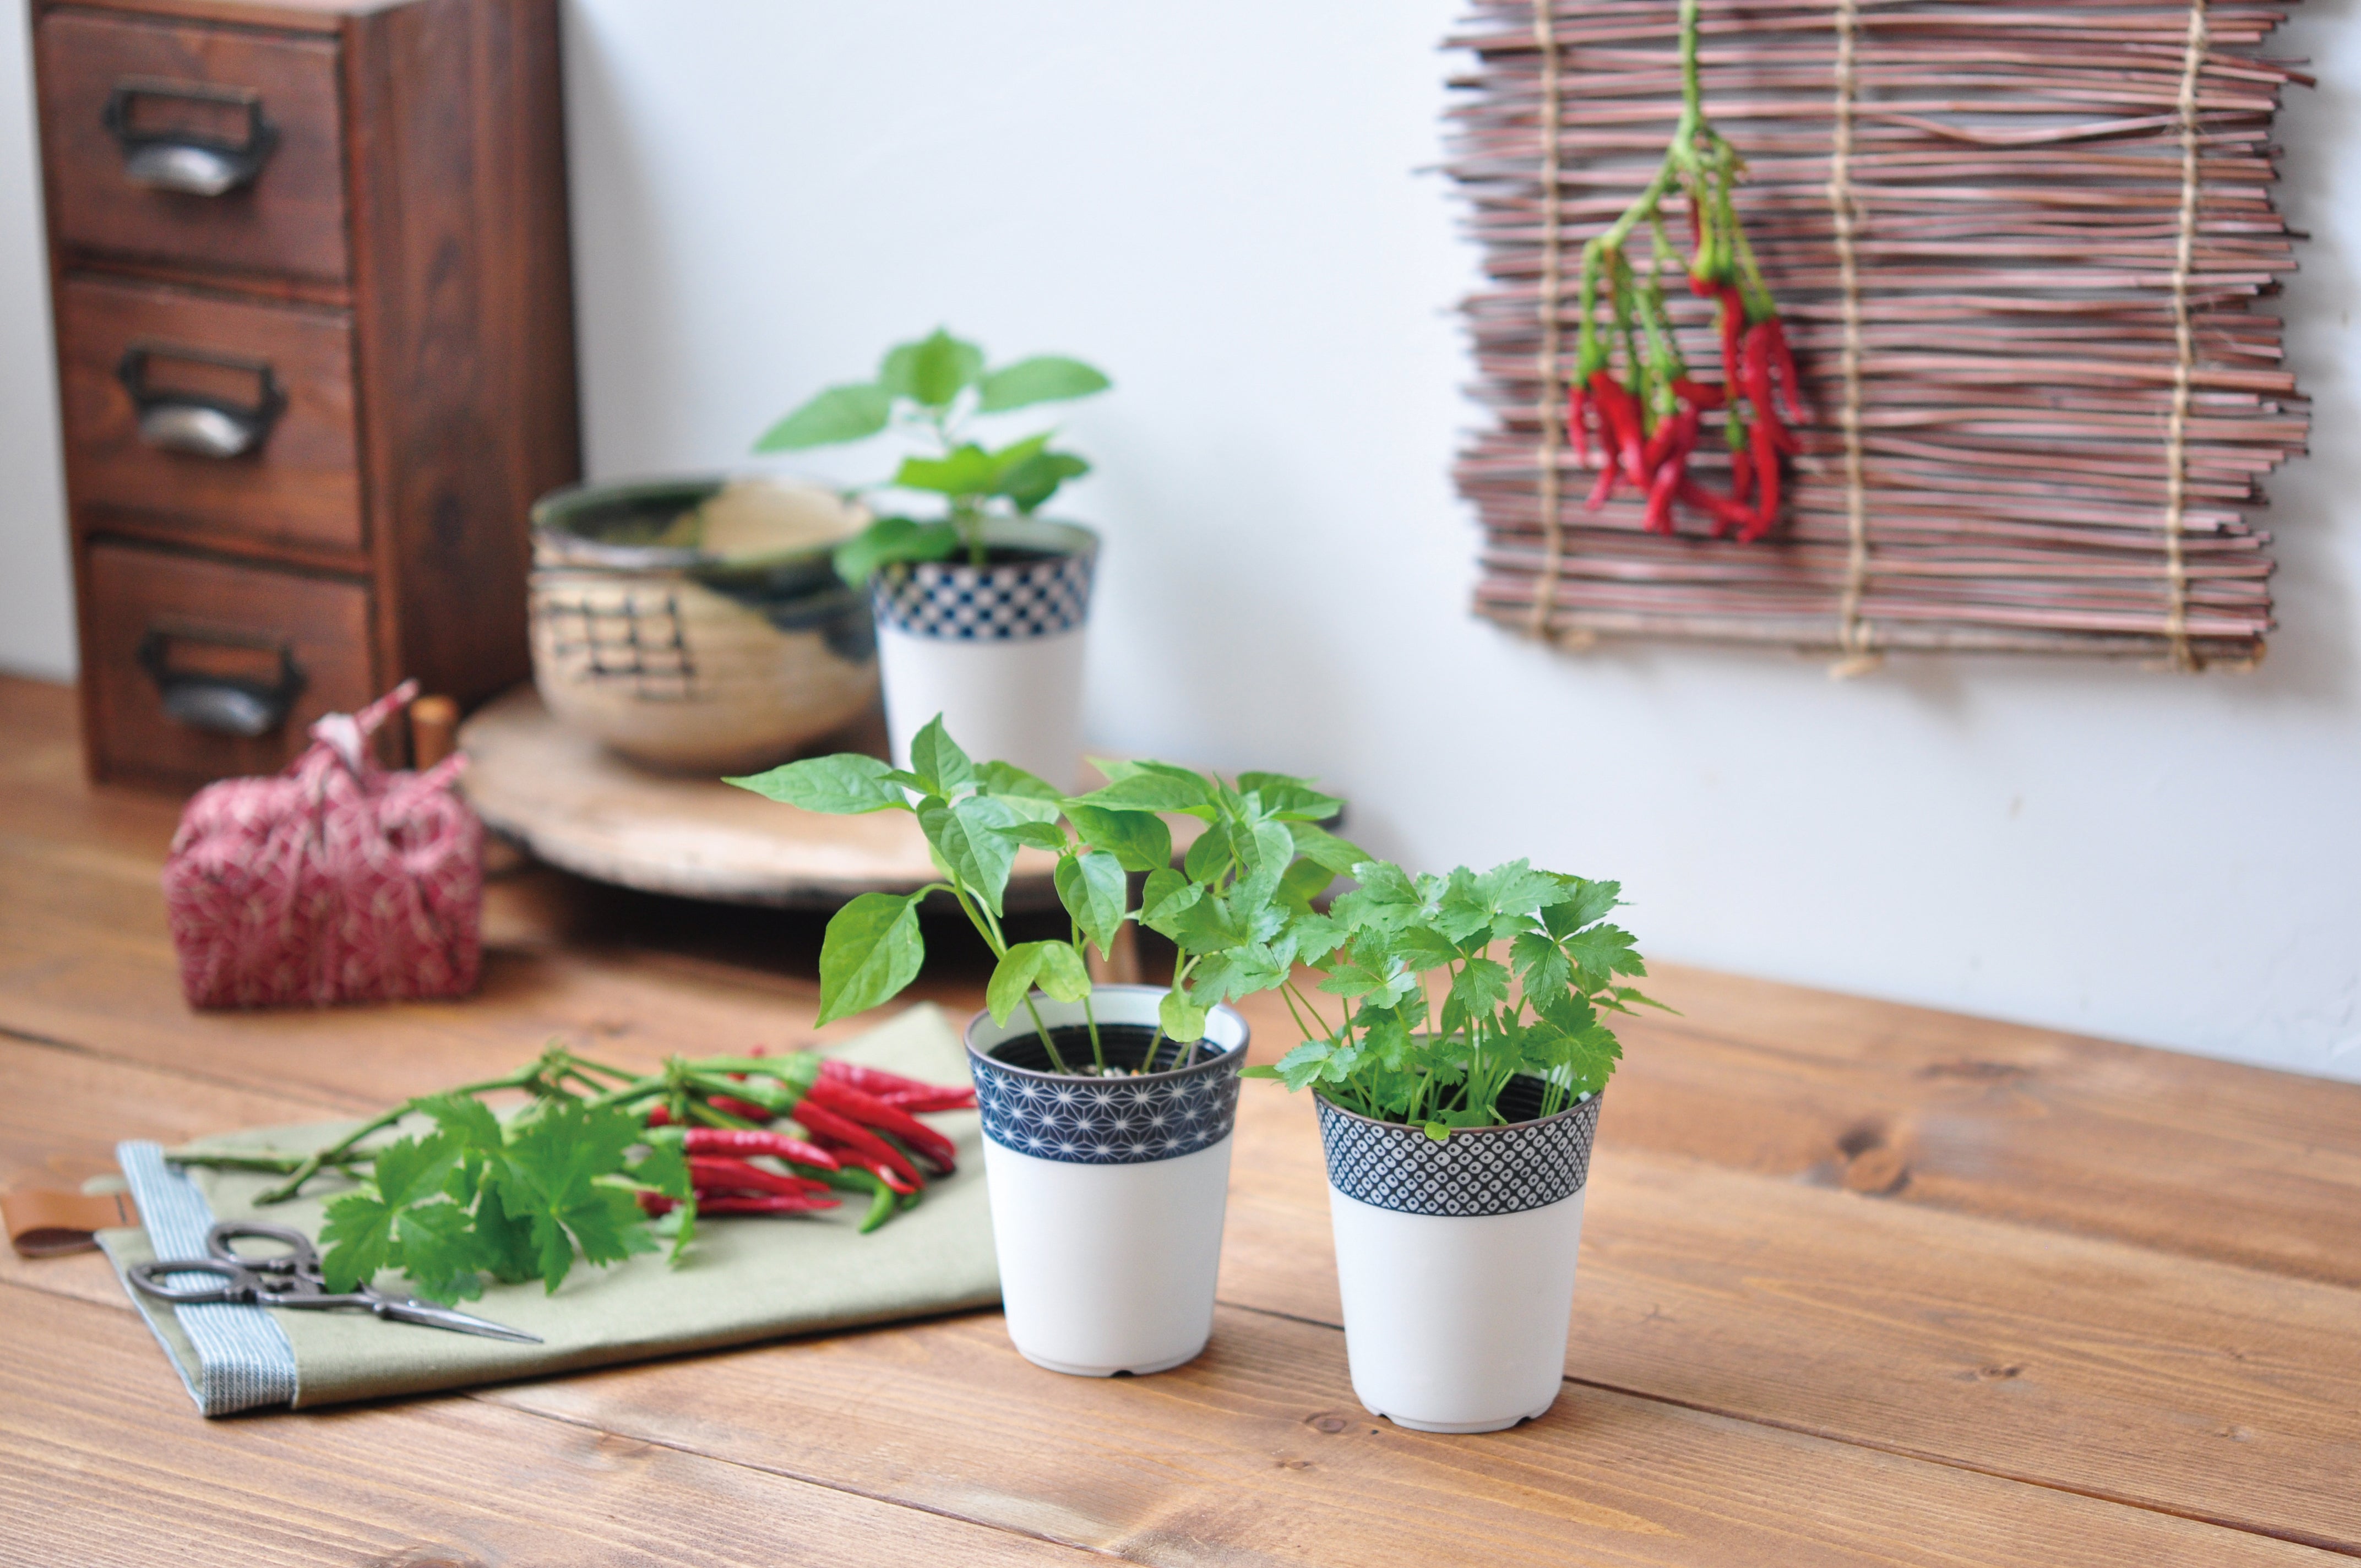 Grow Your Own Japanese Herbs Kit in a Ceramic Pot - Shiso